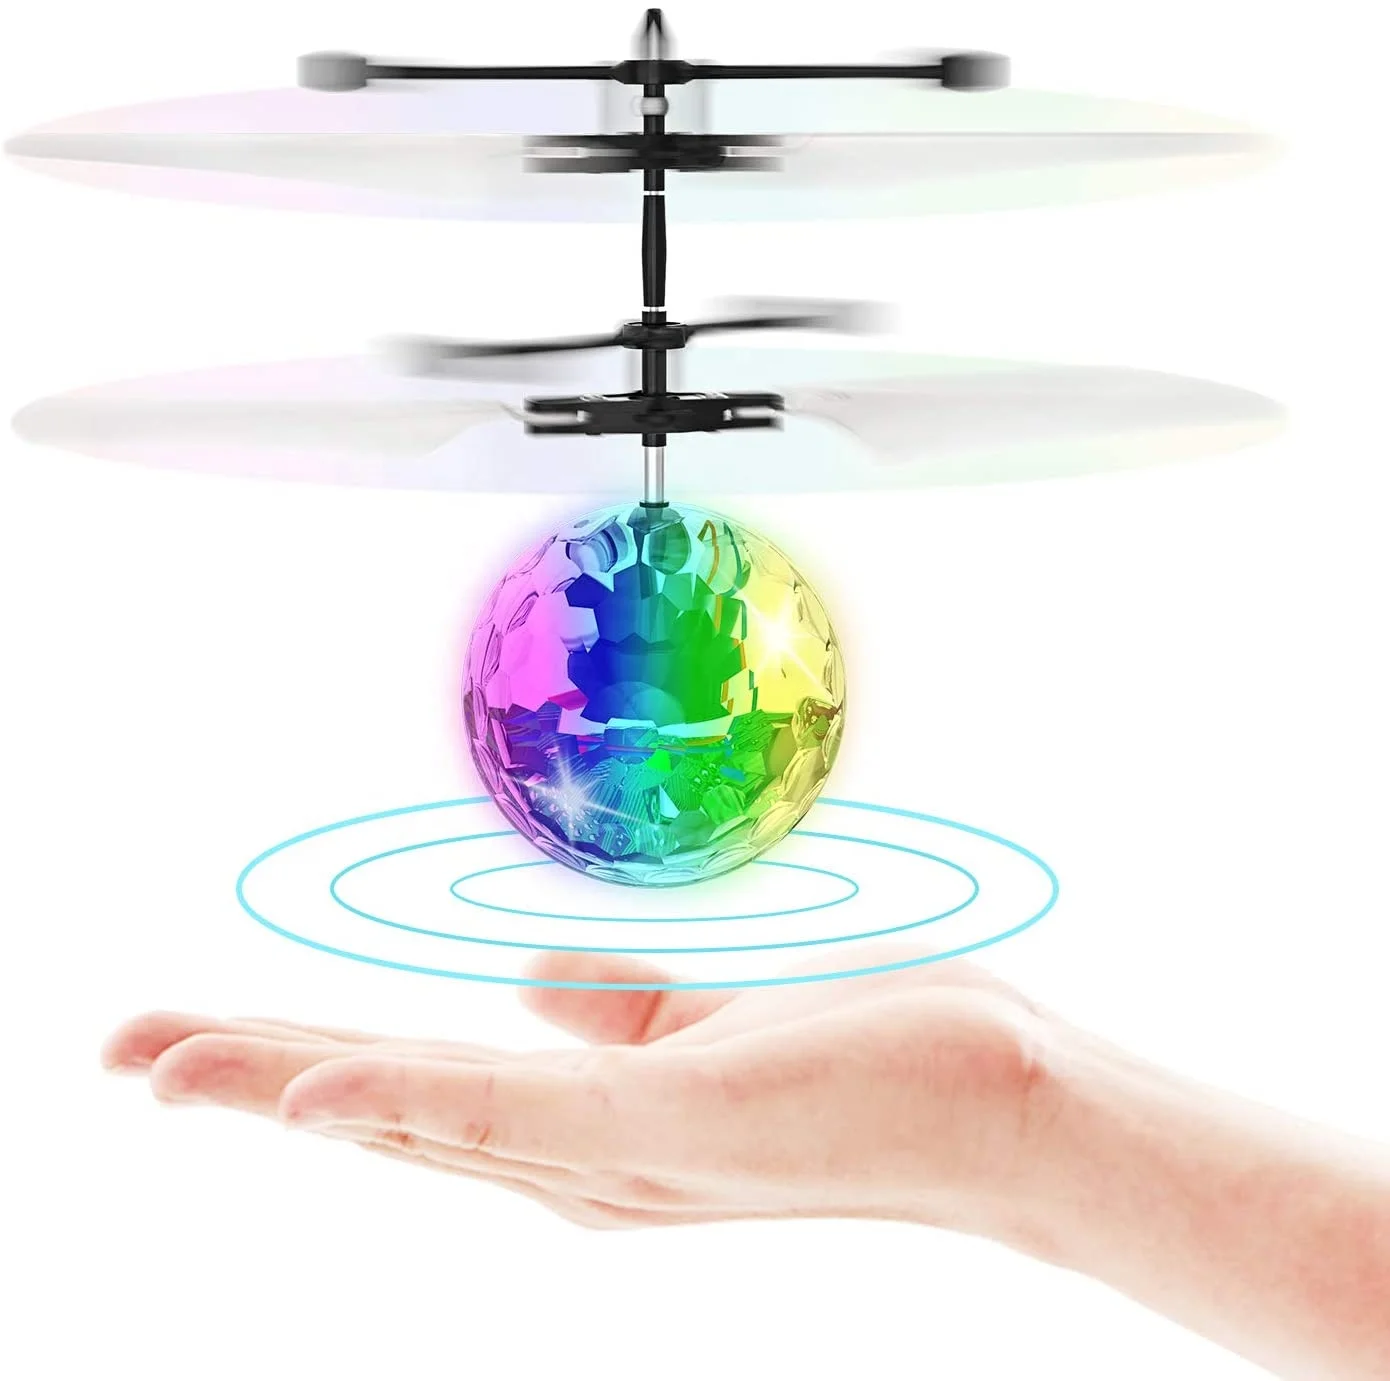 

Fun gift Flying Toy Ball Infrared Induction RC Built-in LED Light Disco Helicopter Shining Colorful Flying Drone Indoor outdoor